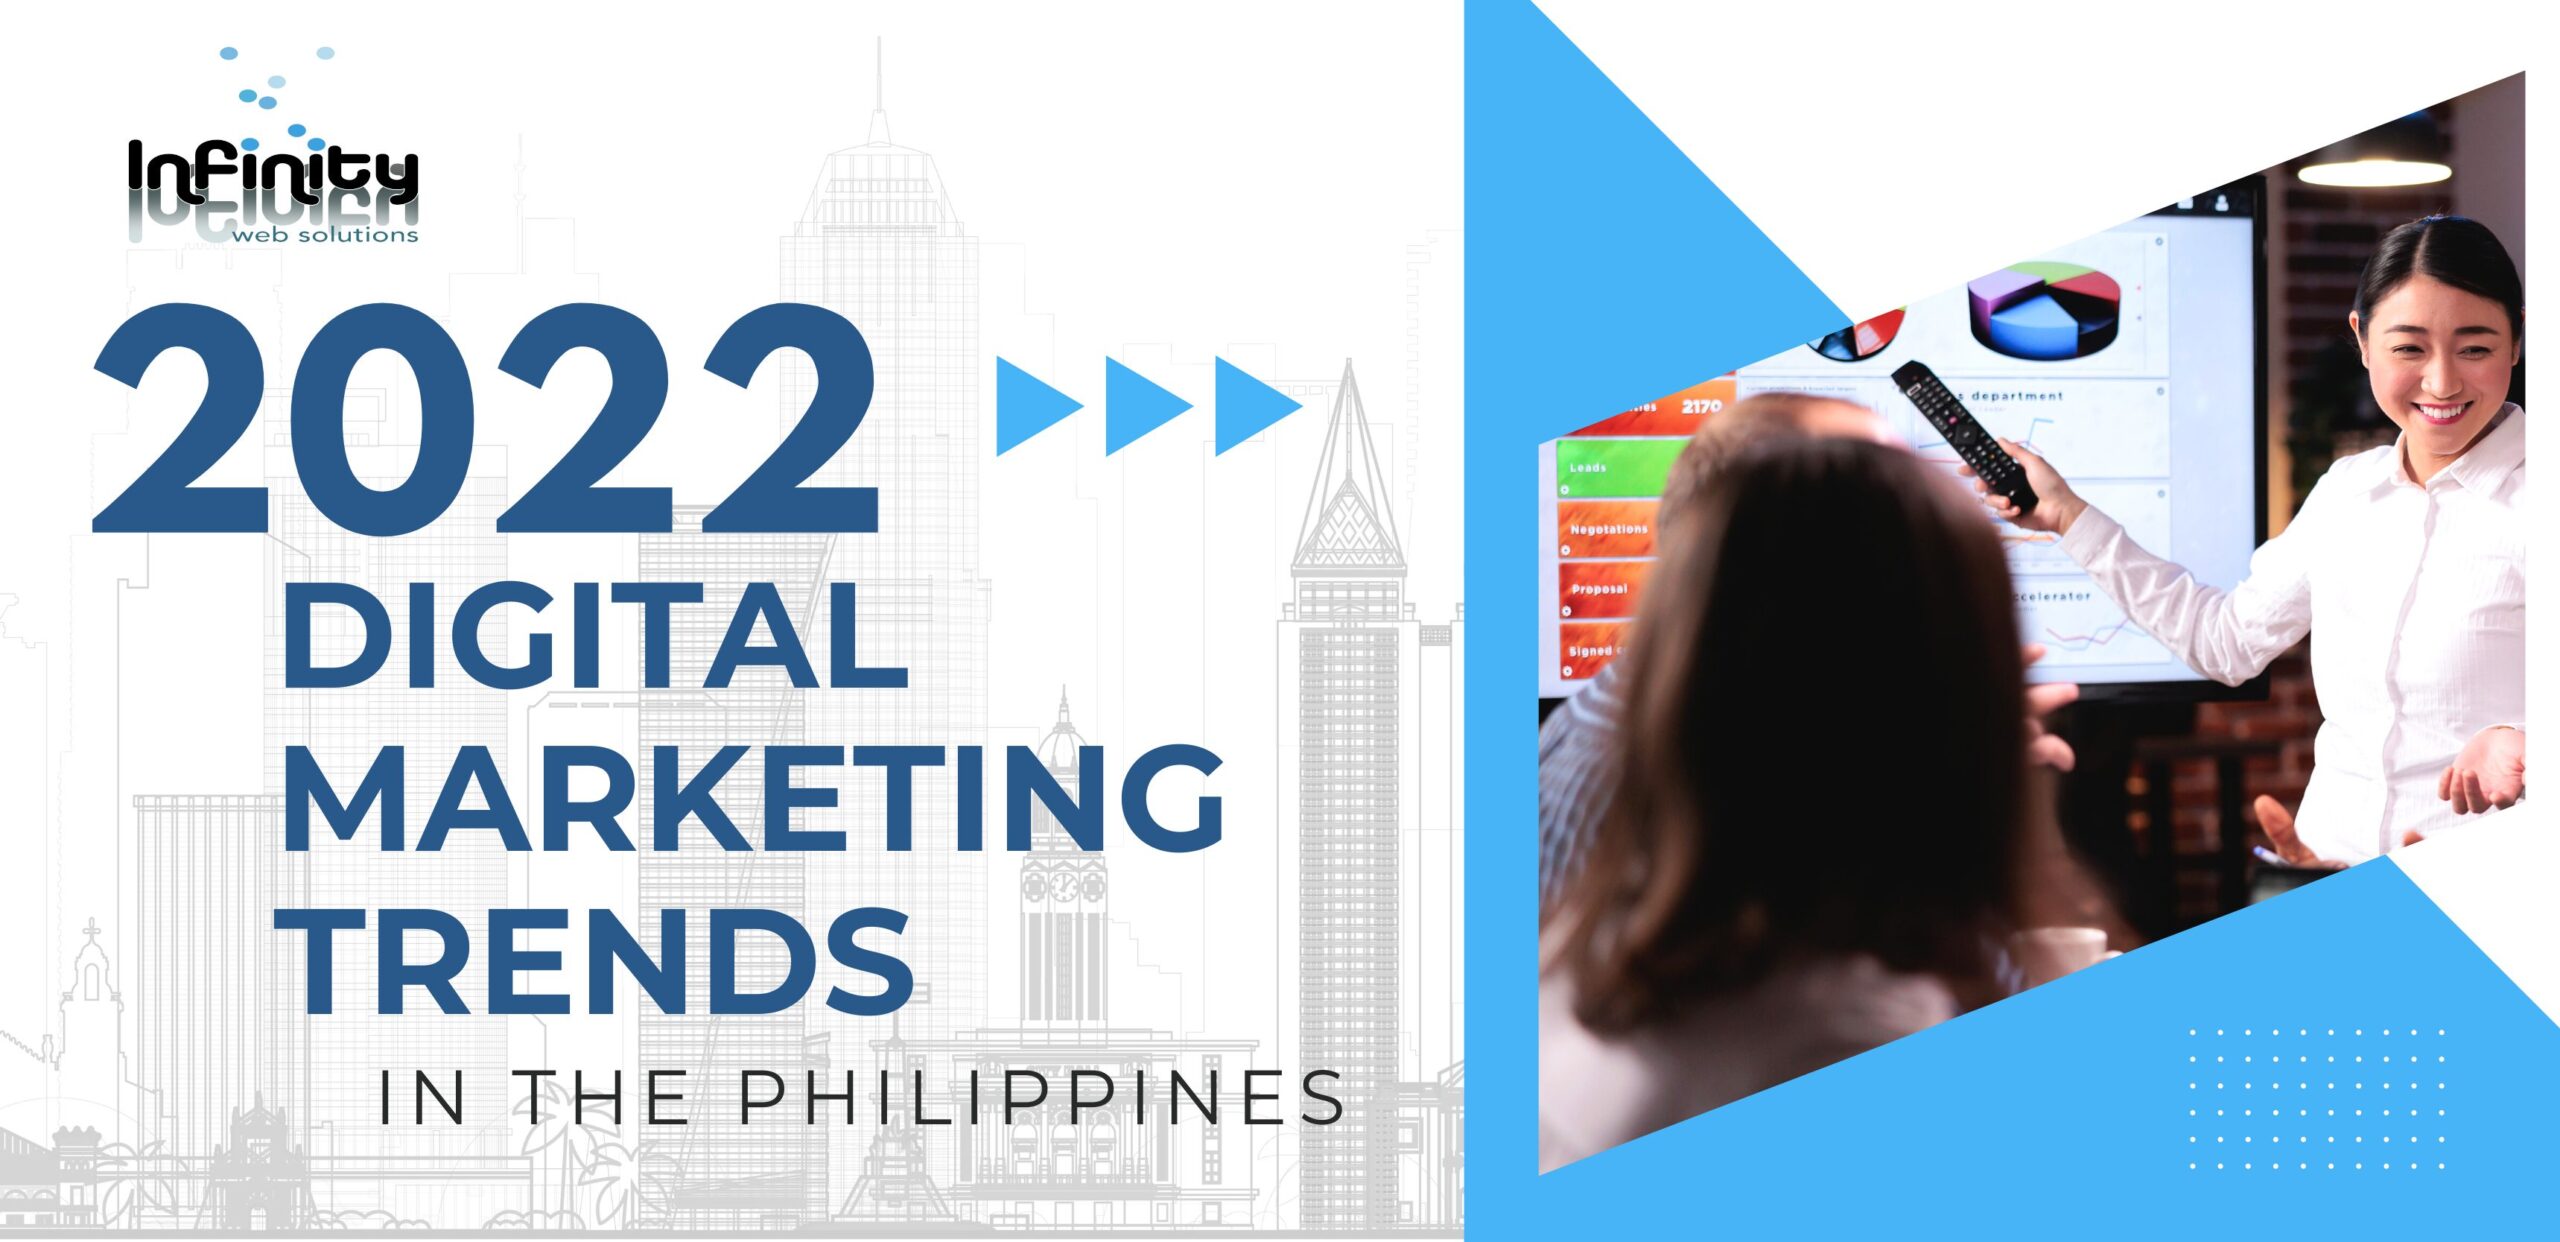 Digital Marketing Trends in the Philippines